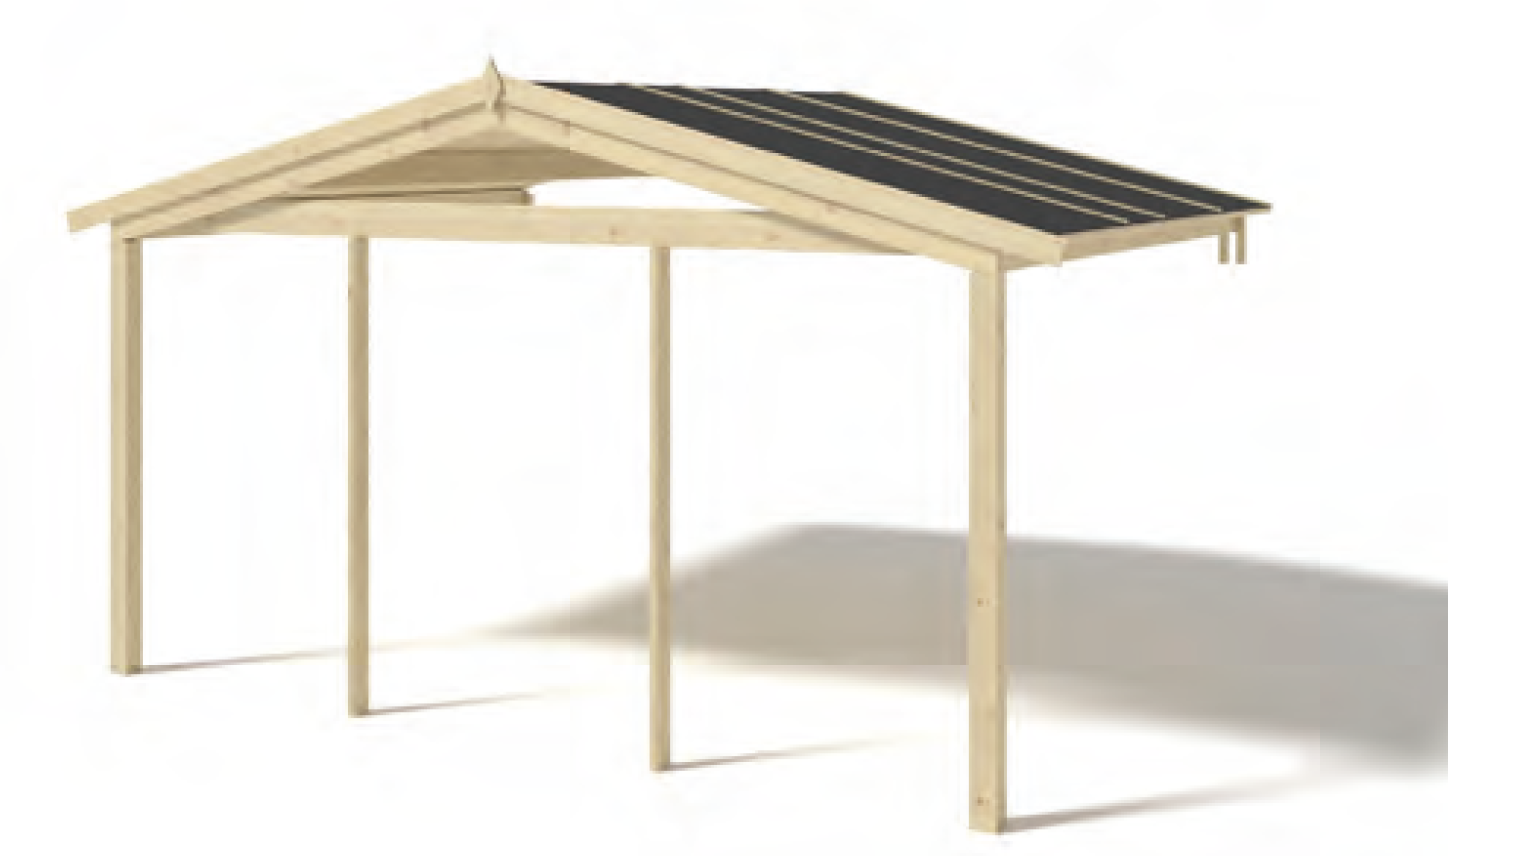 Prague roof and balcony for shelter in wood 400 x 300 cm